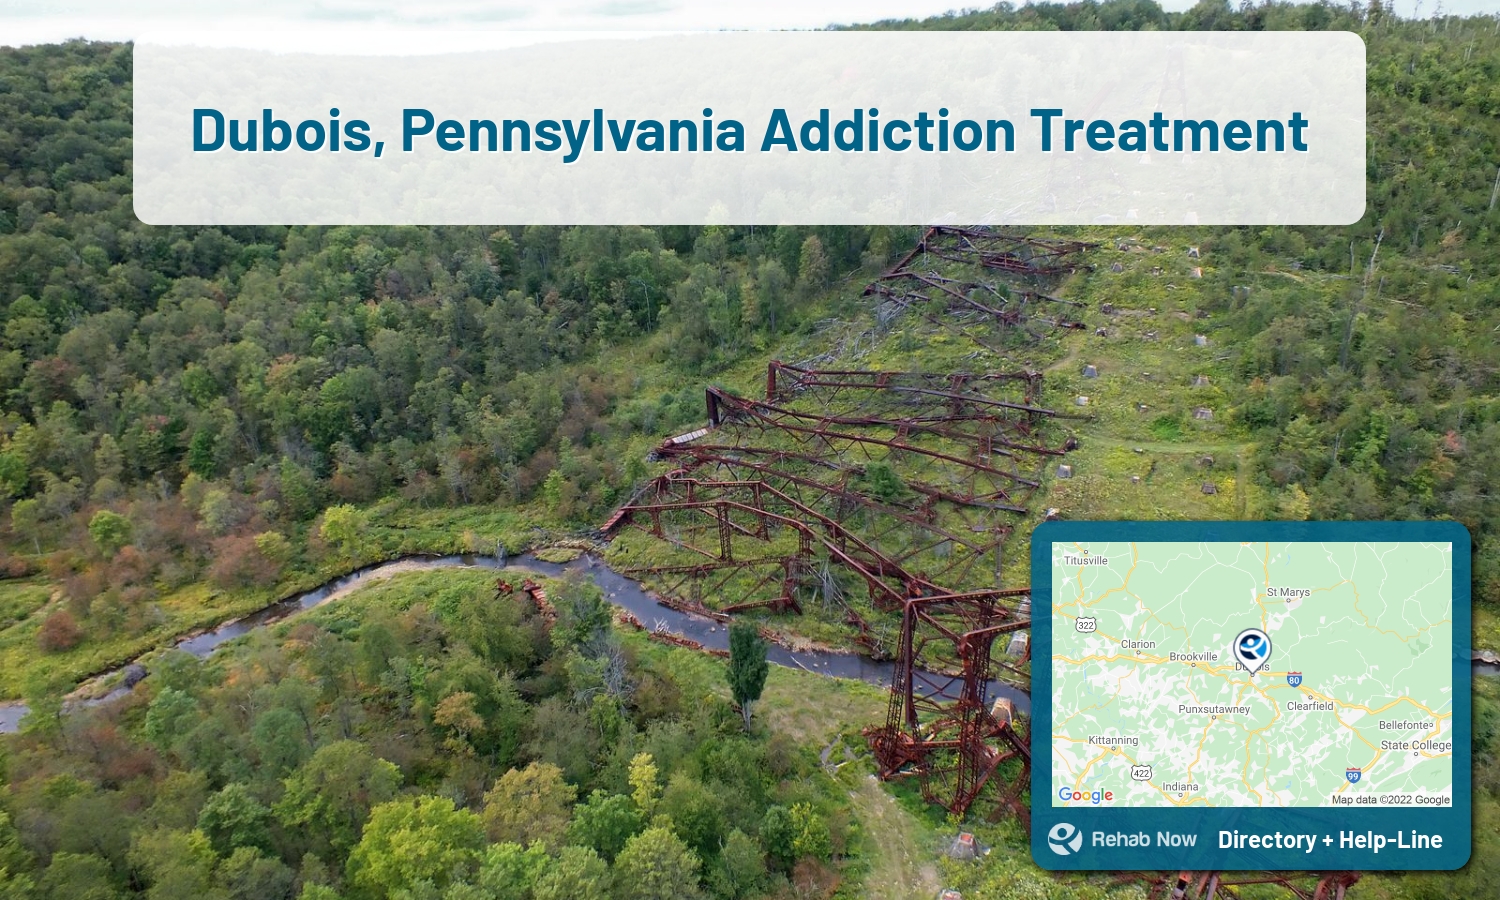 Dubois, PA Treatment Centers. Find drug rehab in Dubois, Pennsylvania, or detox and treatment programs. Get the right help now!